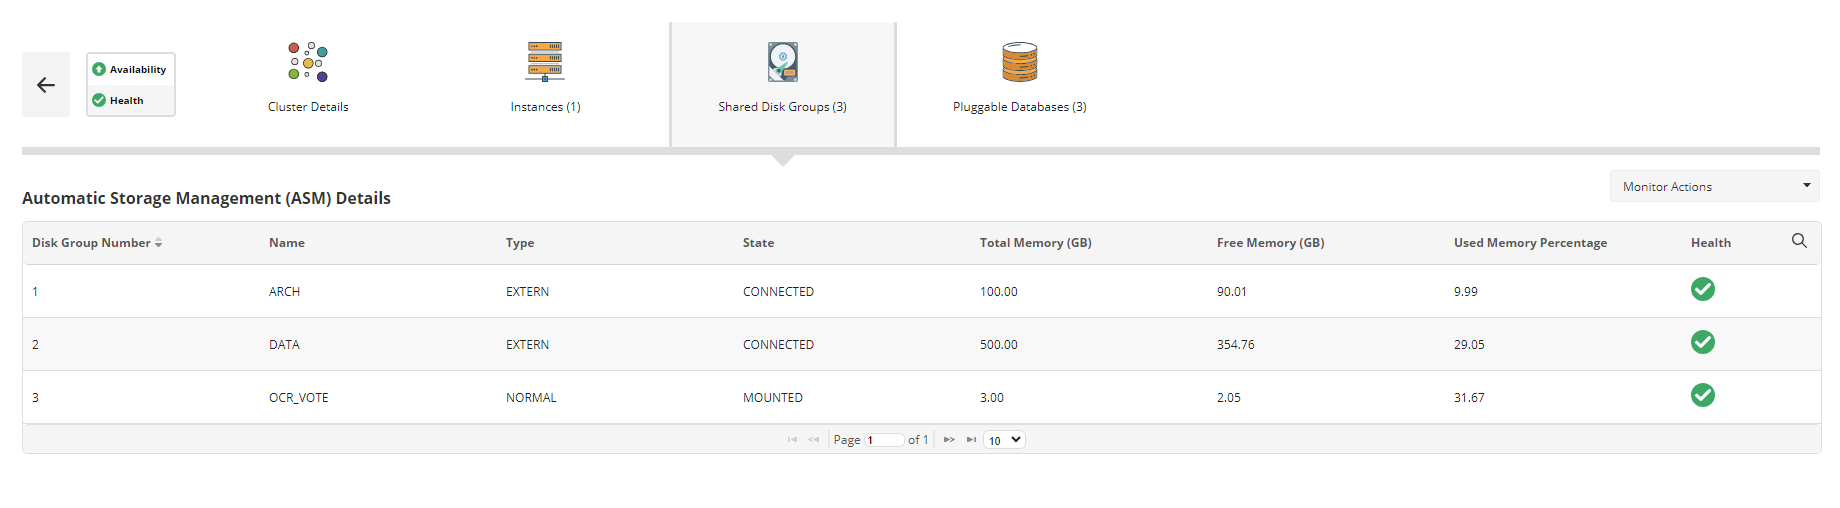 Oracle RAC Monitoring Metrics - ManageEngine Applications Manager